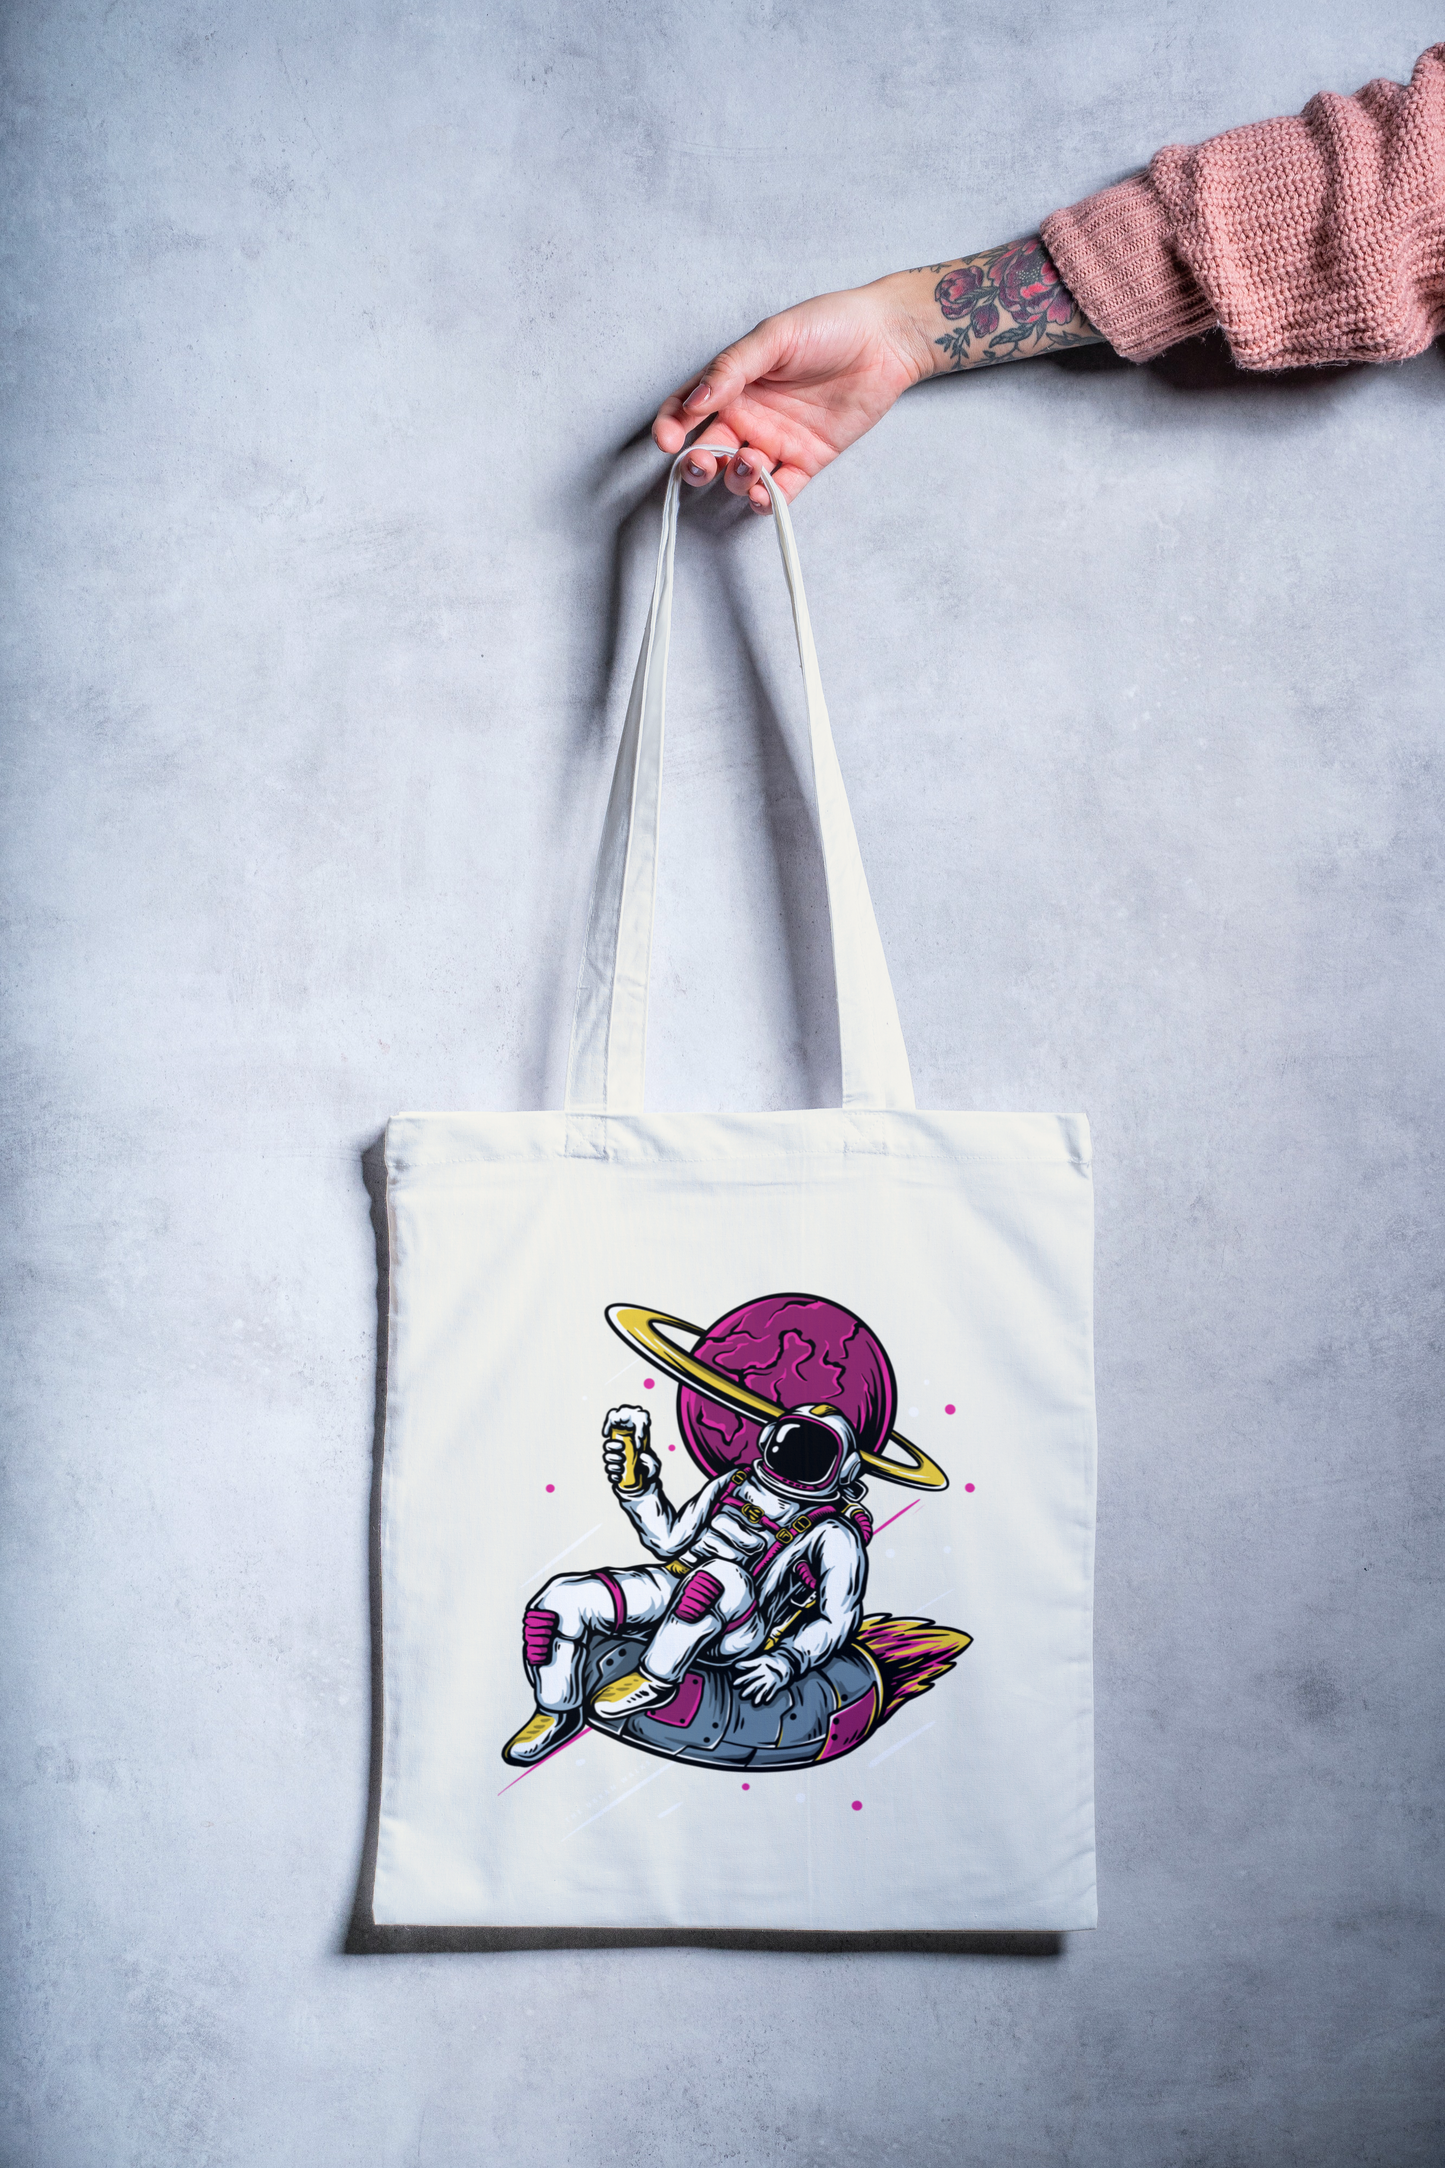 Black/White Astronaut Tote Bag with Zipper